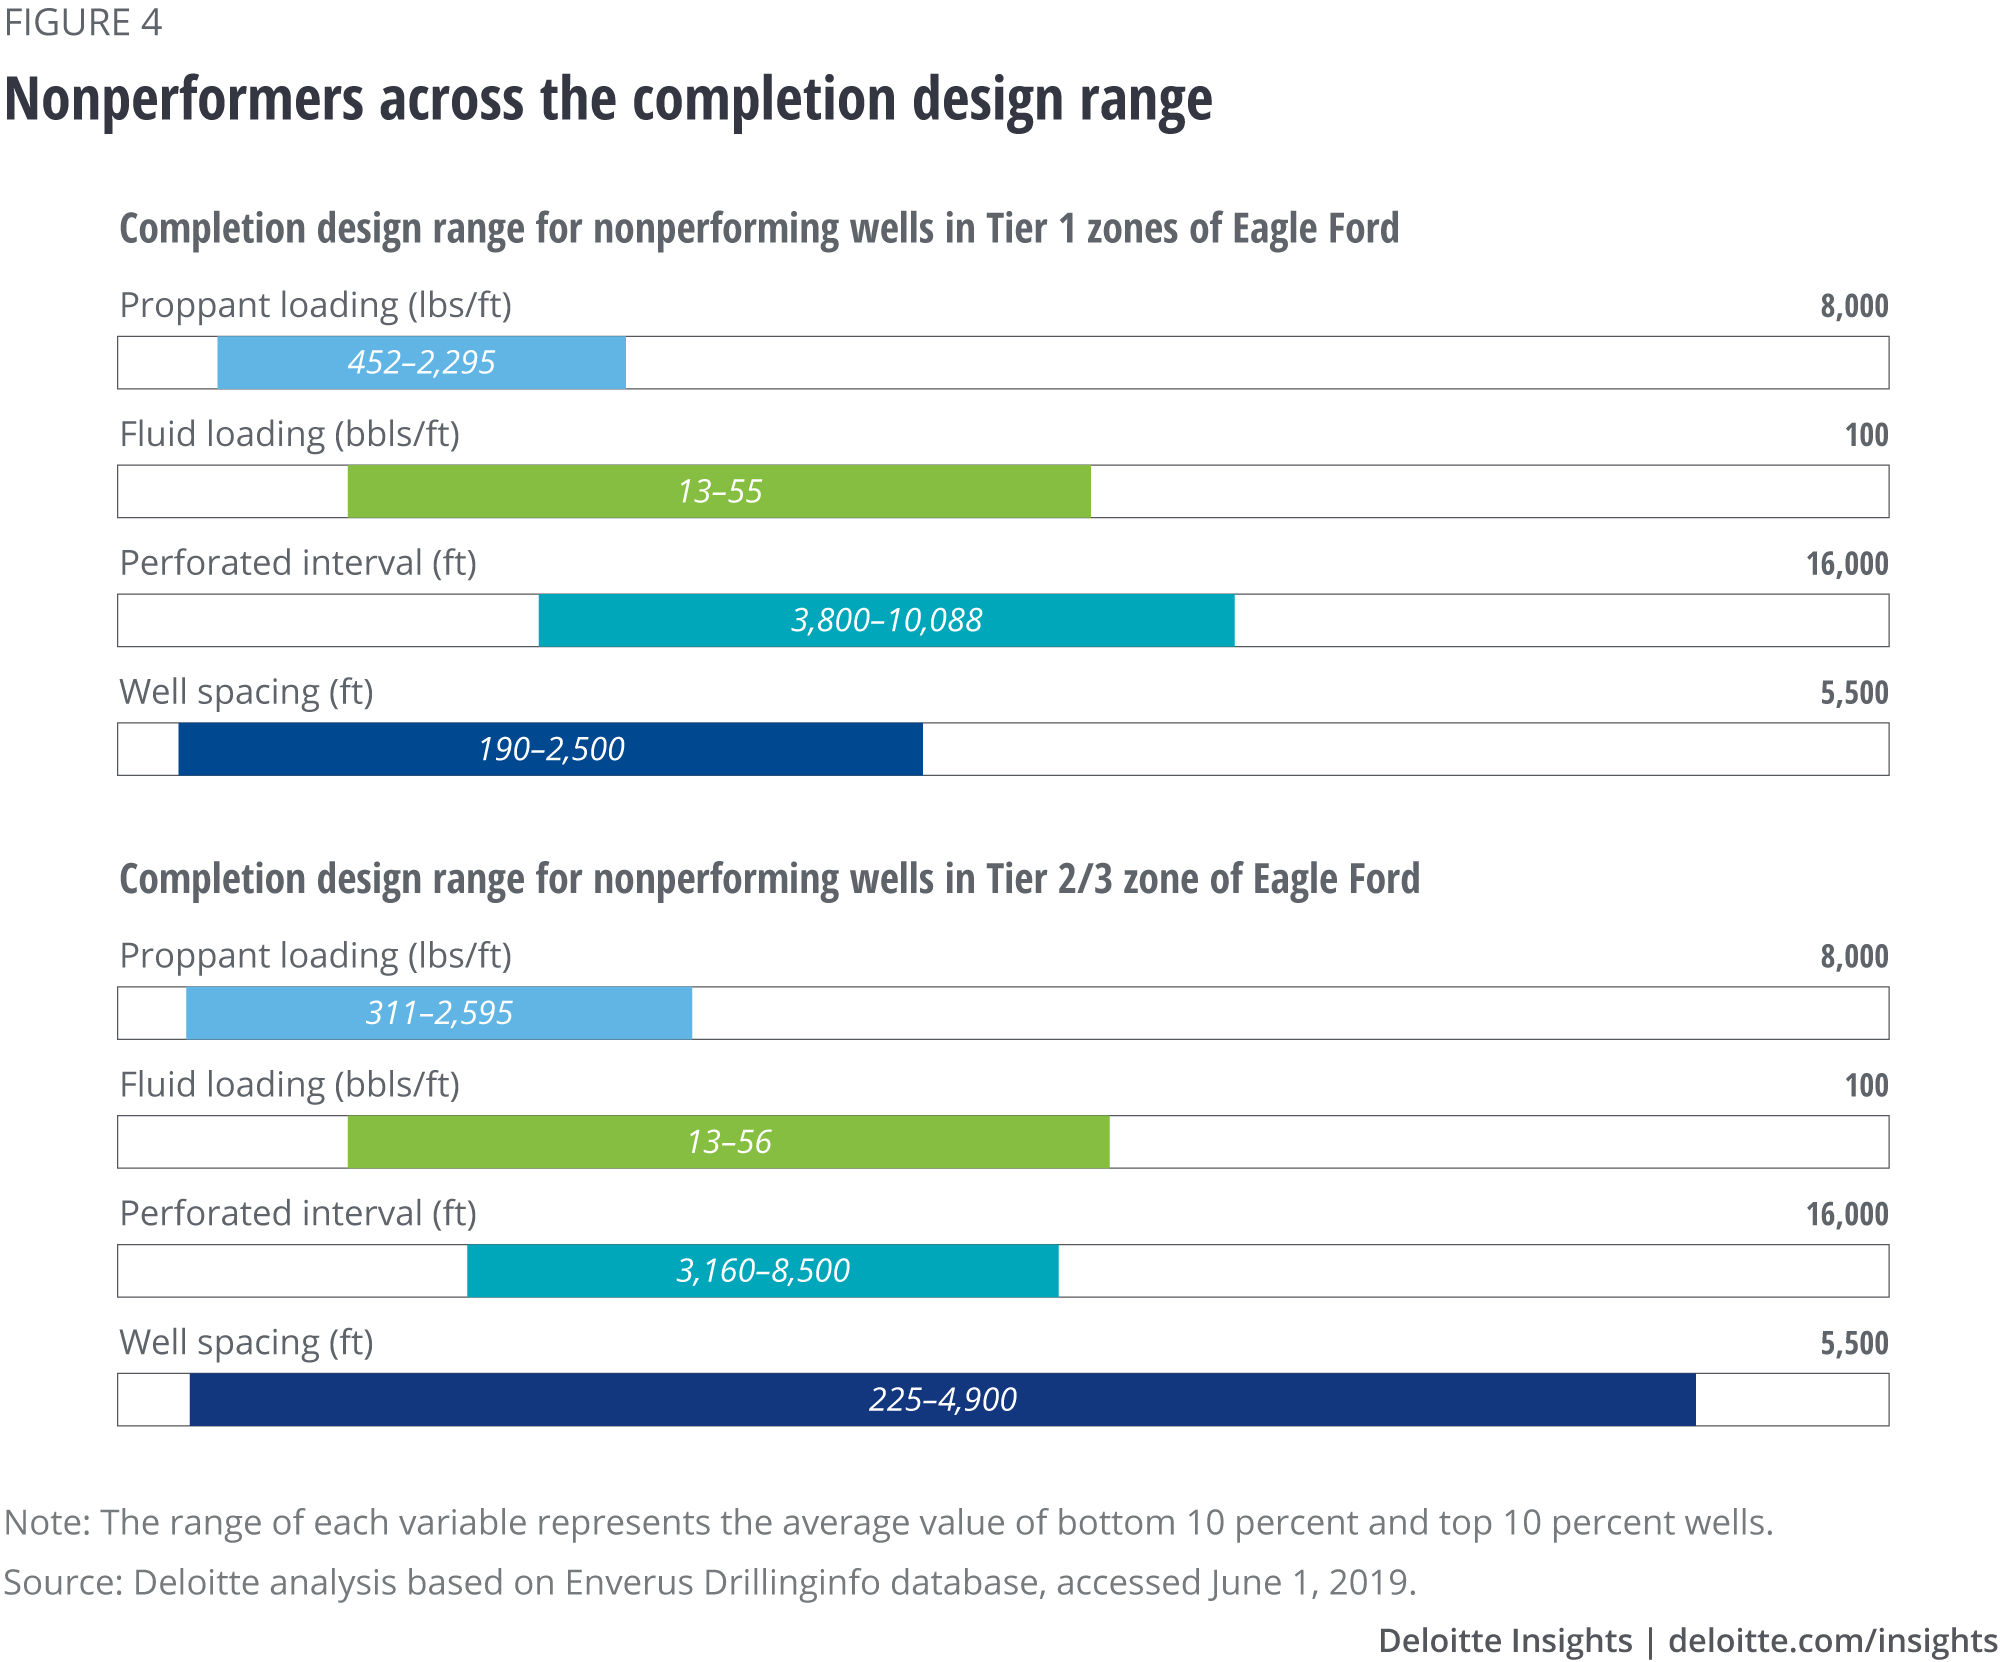 Nonperformers across the completion design range